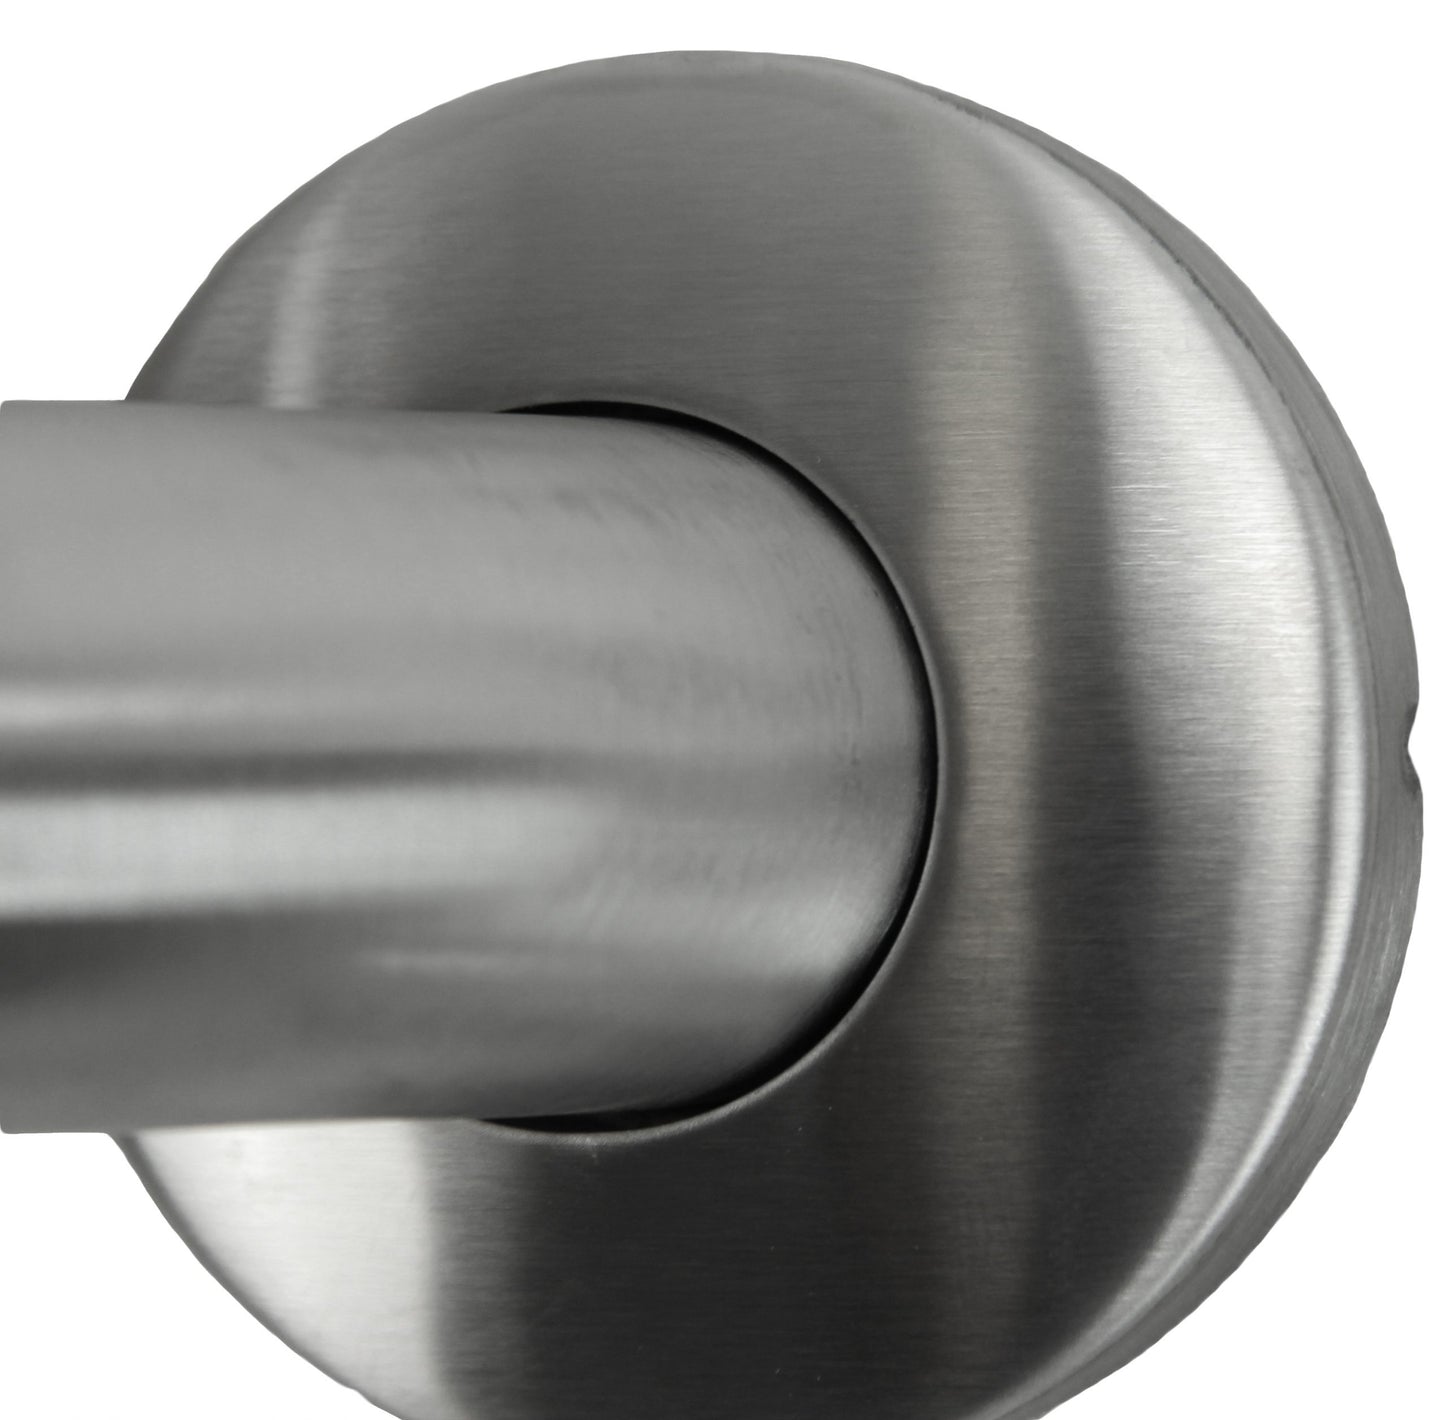 Frost grab bar button close view